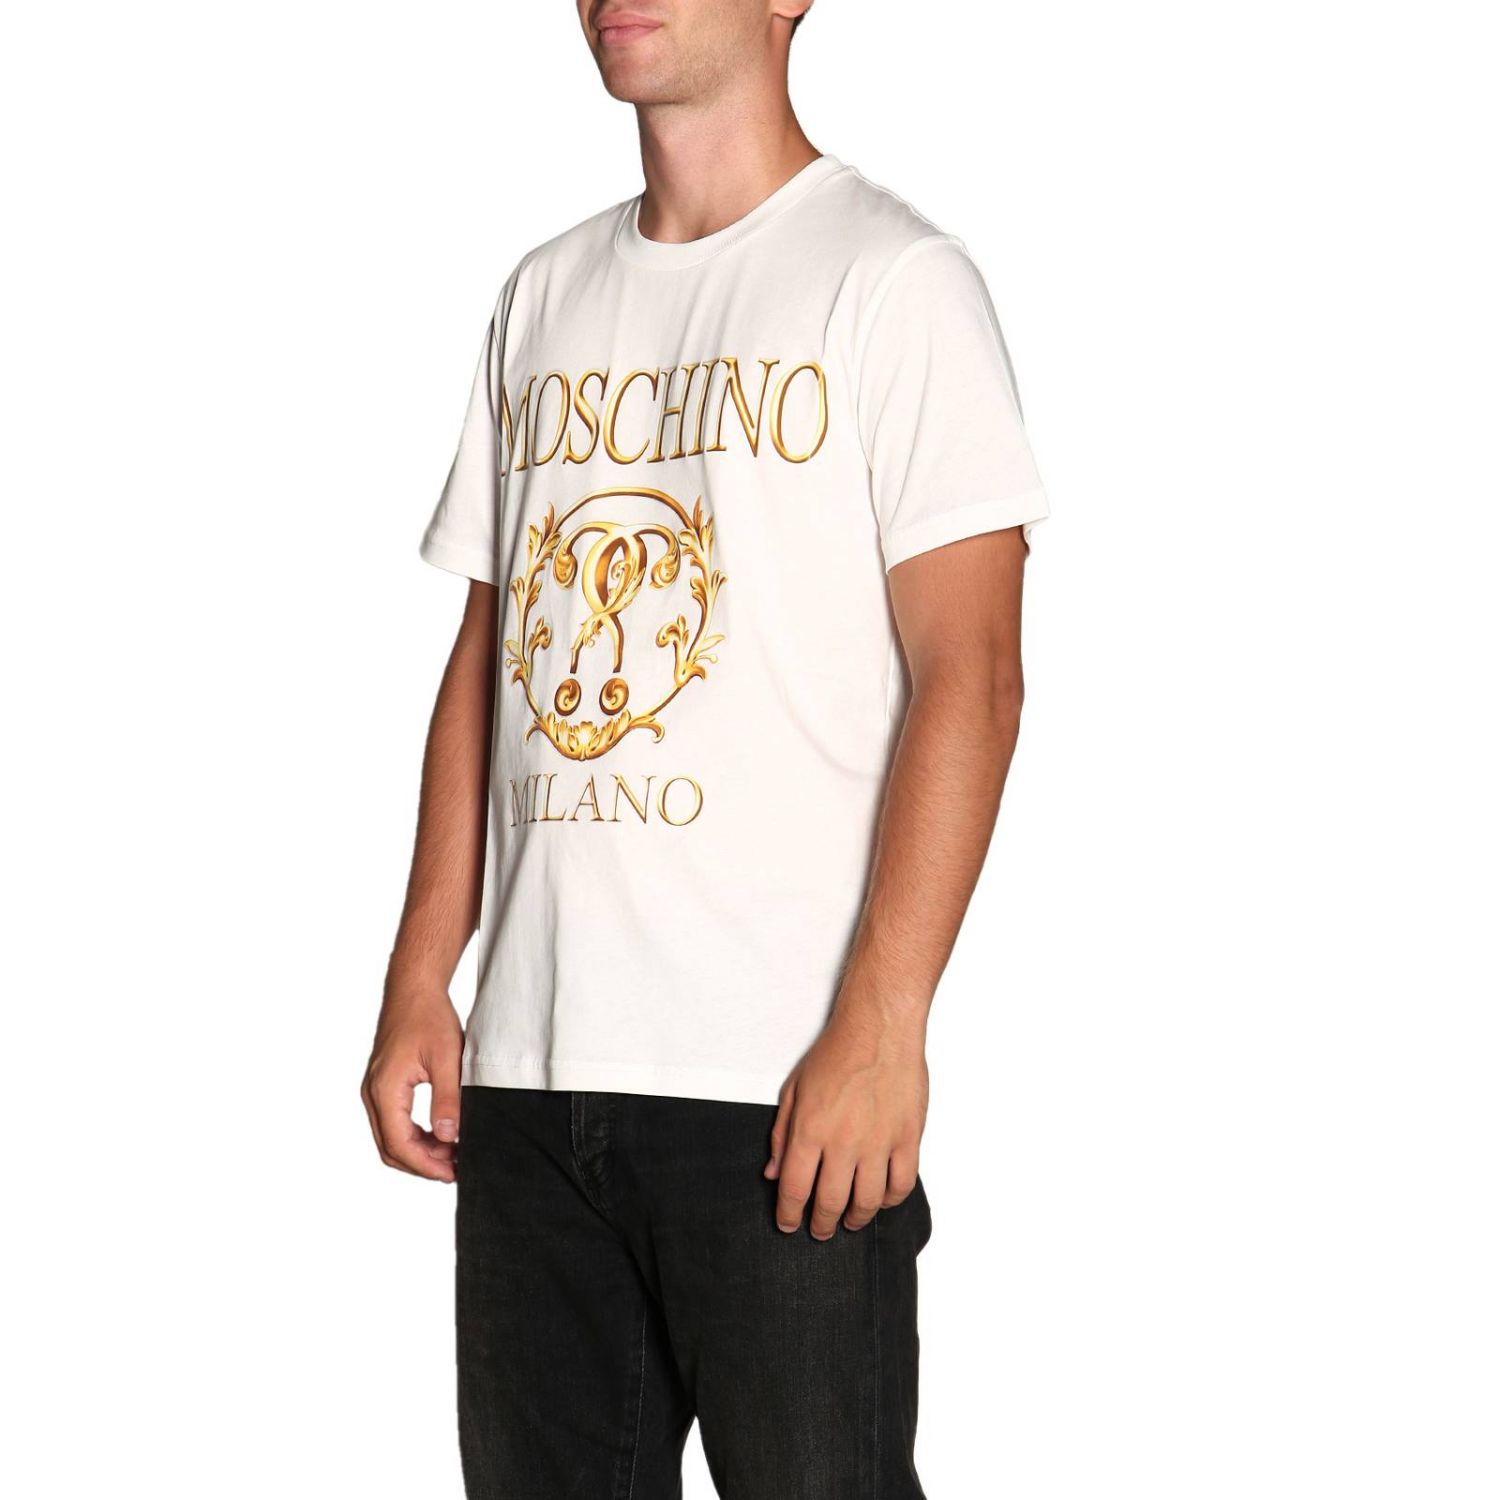 Moschino Couture Outlet: t-shirt for men - White | Moschino Couture t ...